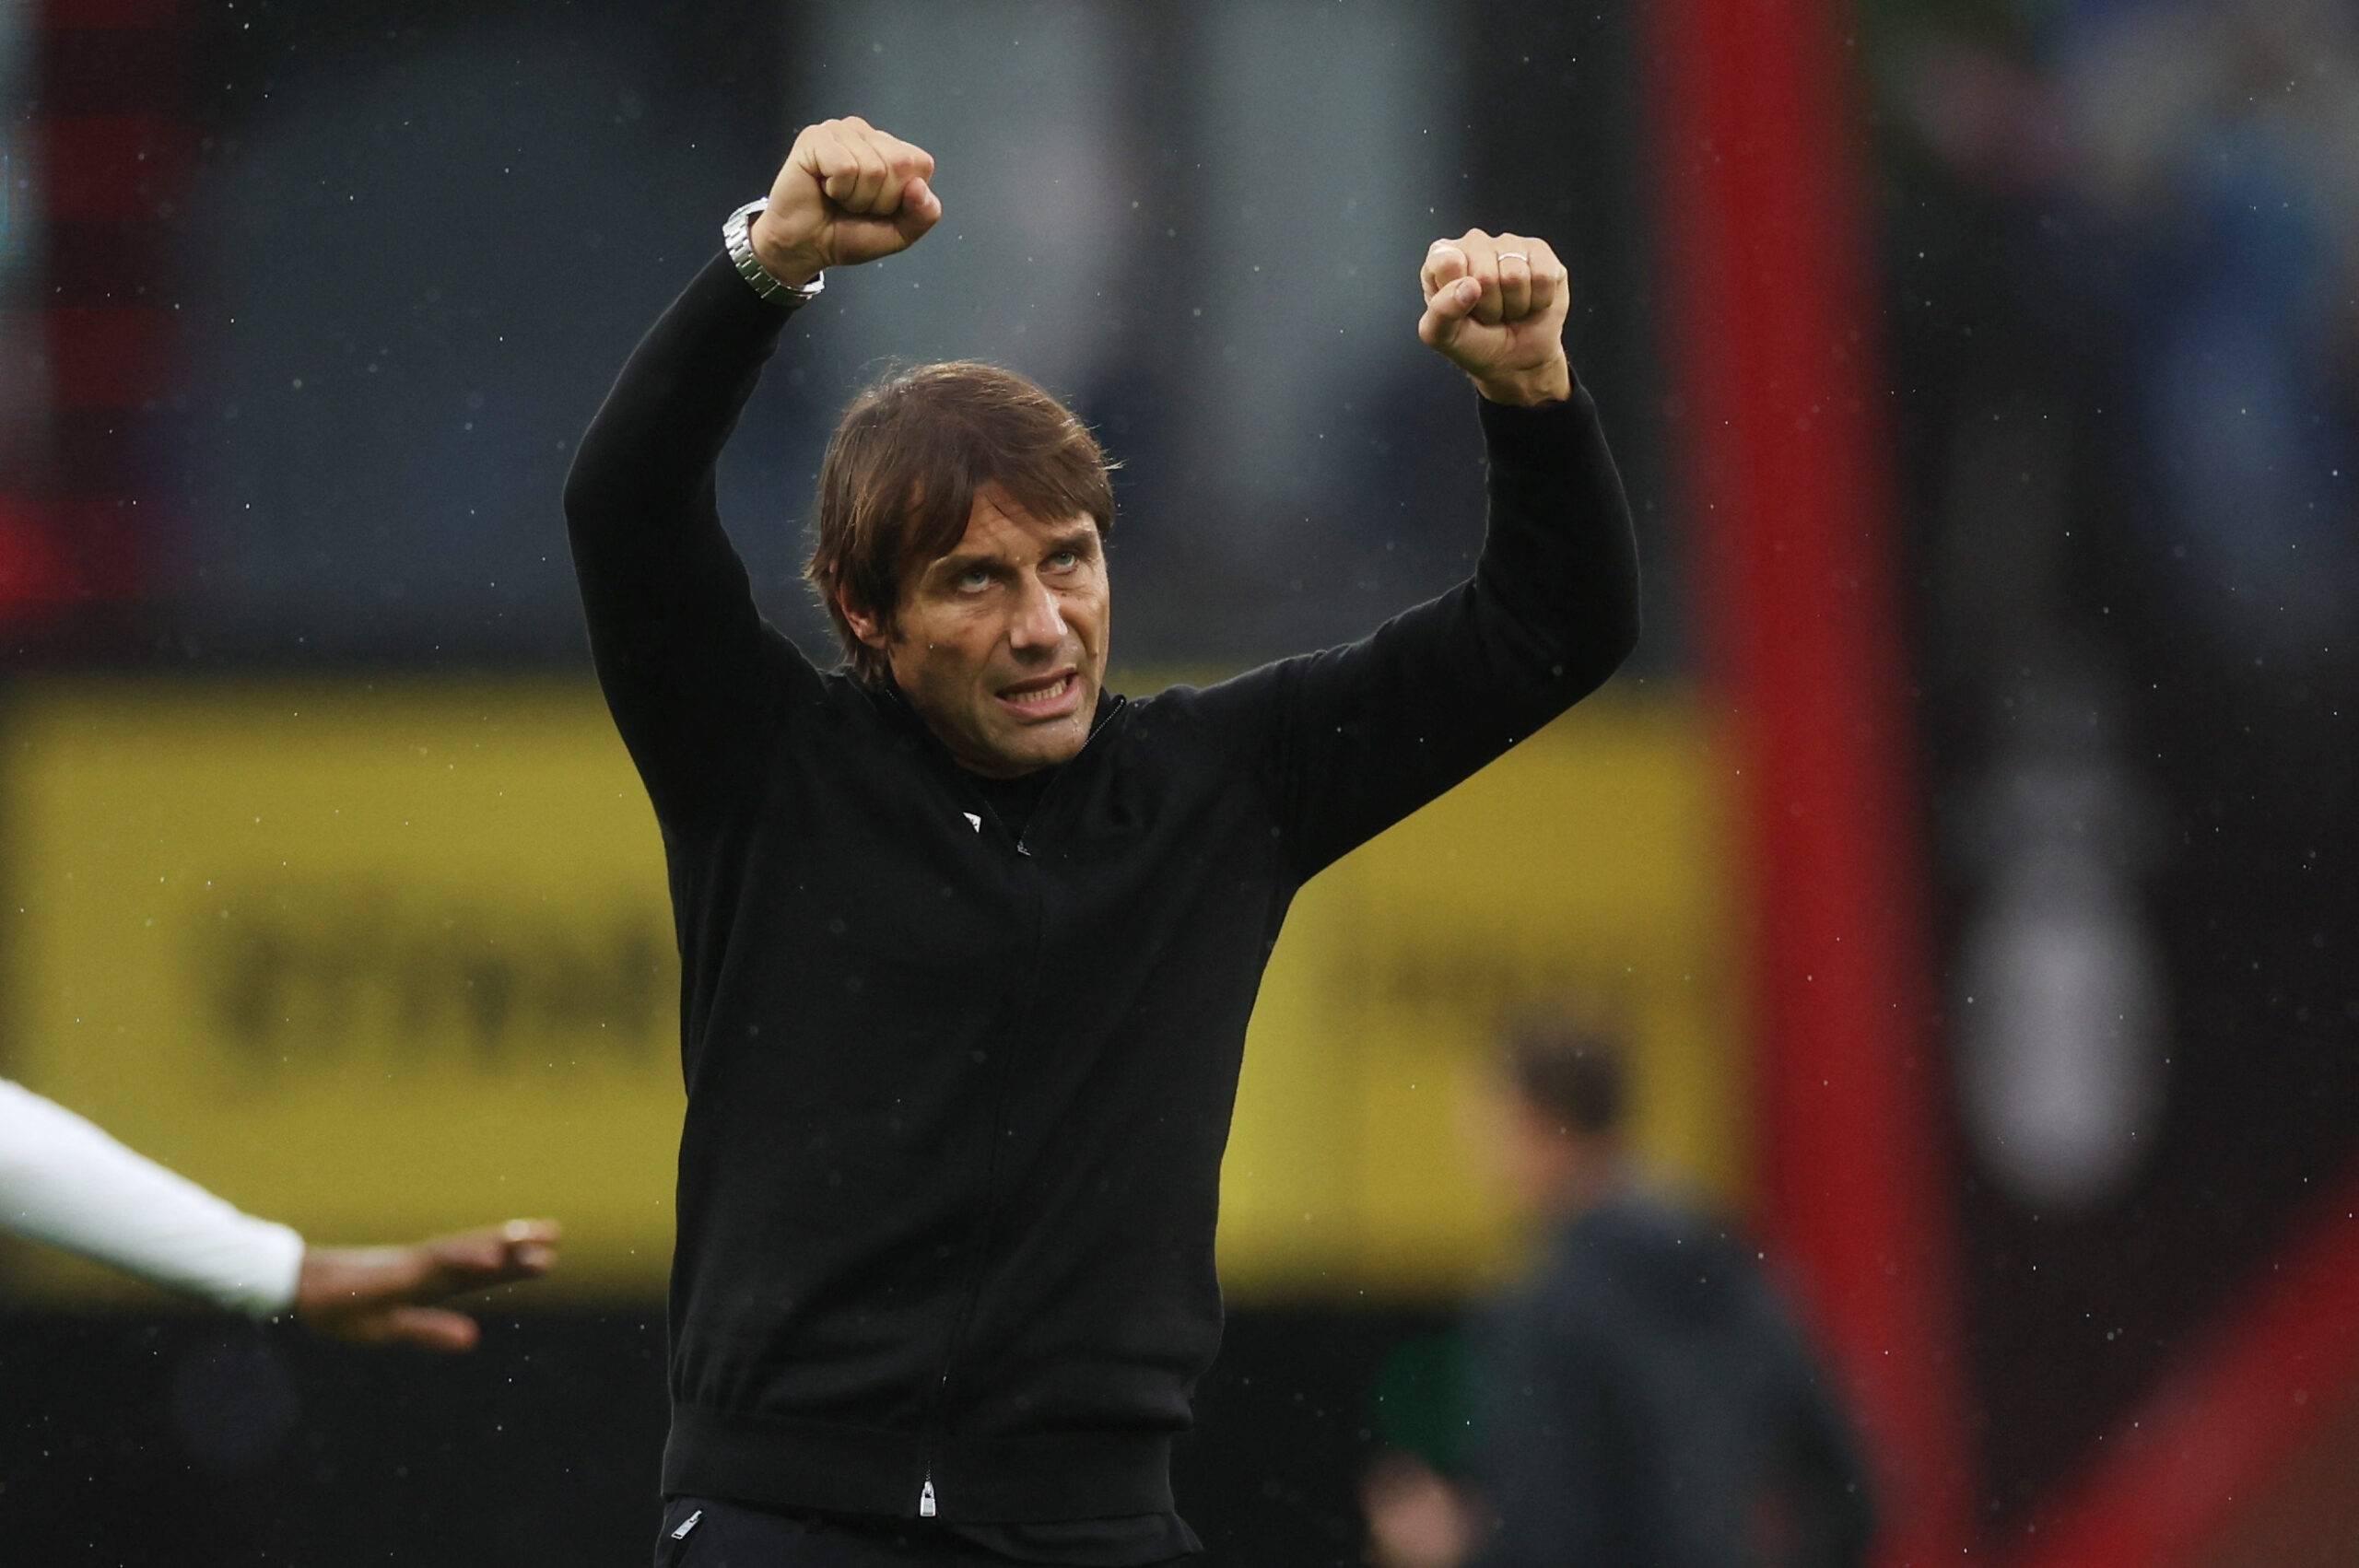 Tottenham manager Antonio Conte celebrates after his side beat Bournemouth.